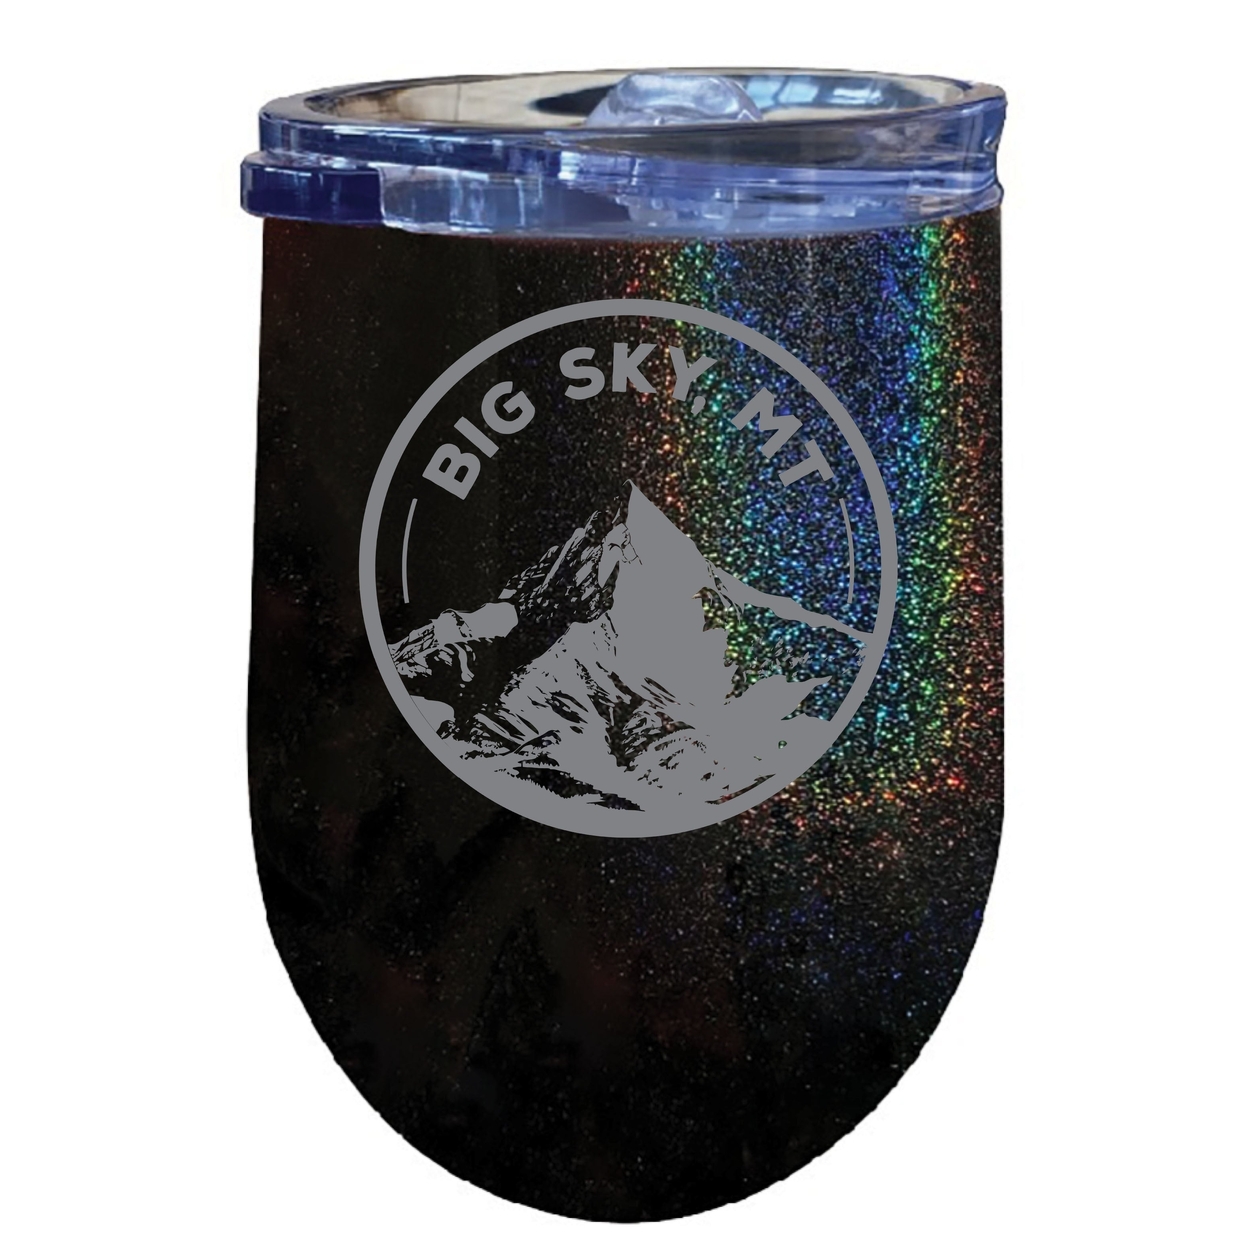 Big Sky Montana Souvenir 12 Oz Engraved Insulated Wine Stainless Steel Tumbler - Rose Gold,,Single Unit